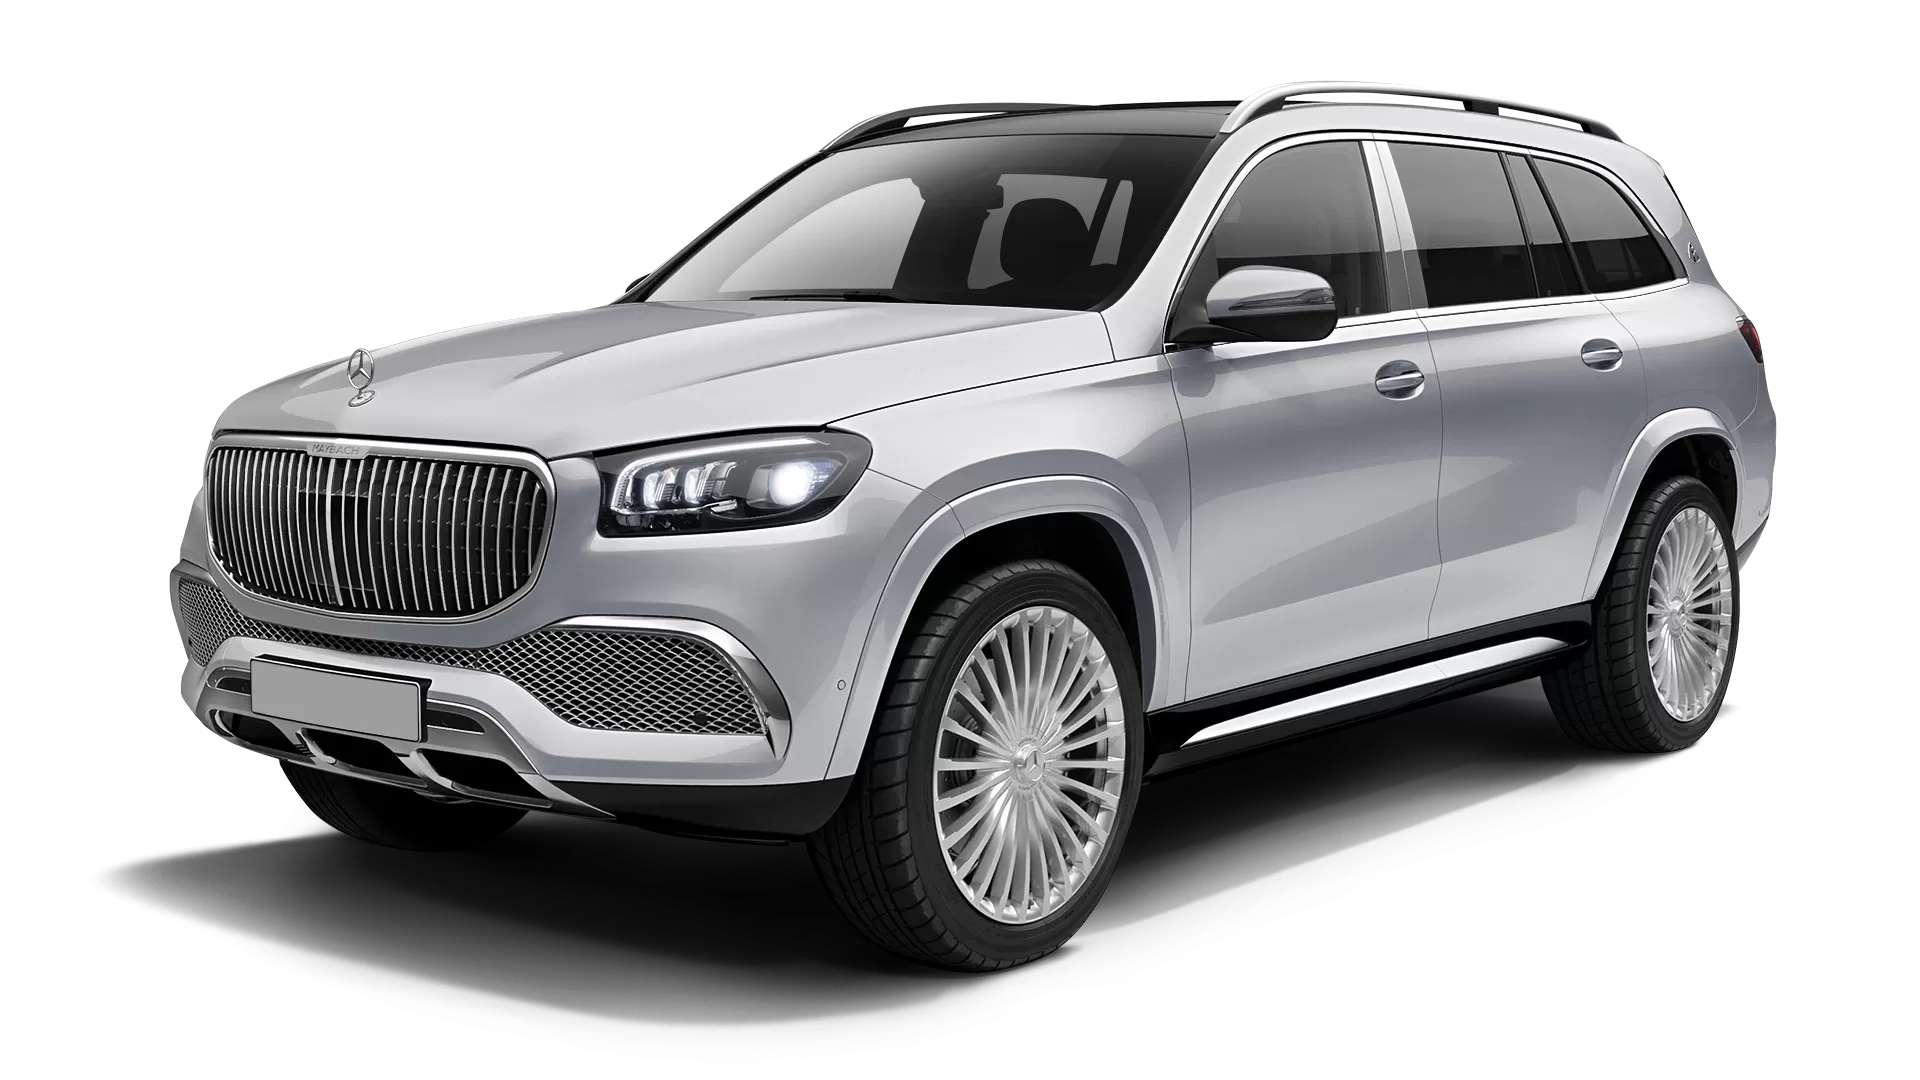 Mercedes Maybach GLS 600 stock front view in High Tech Silver color